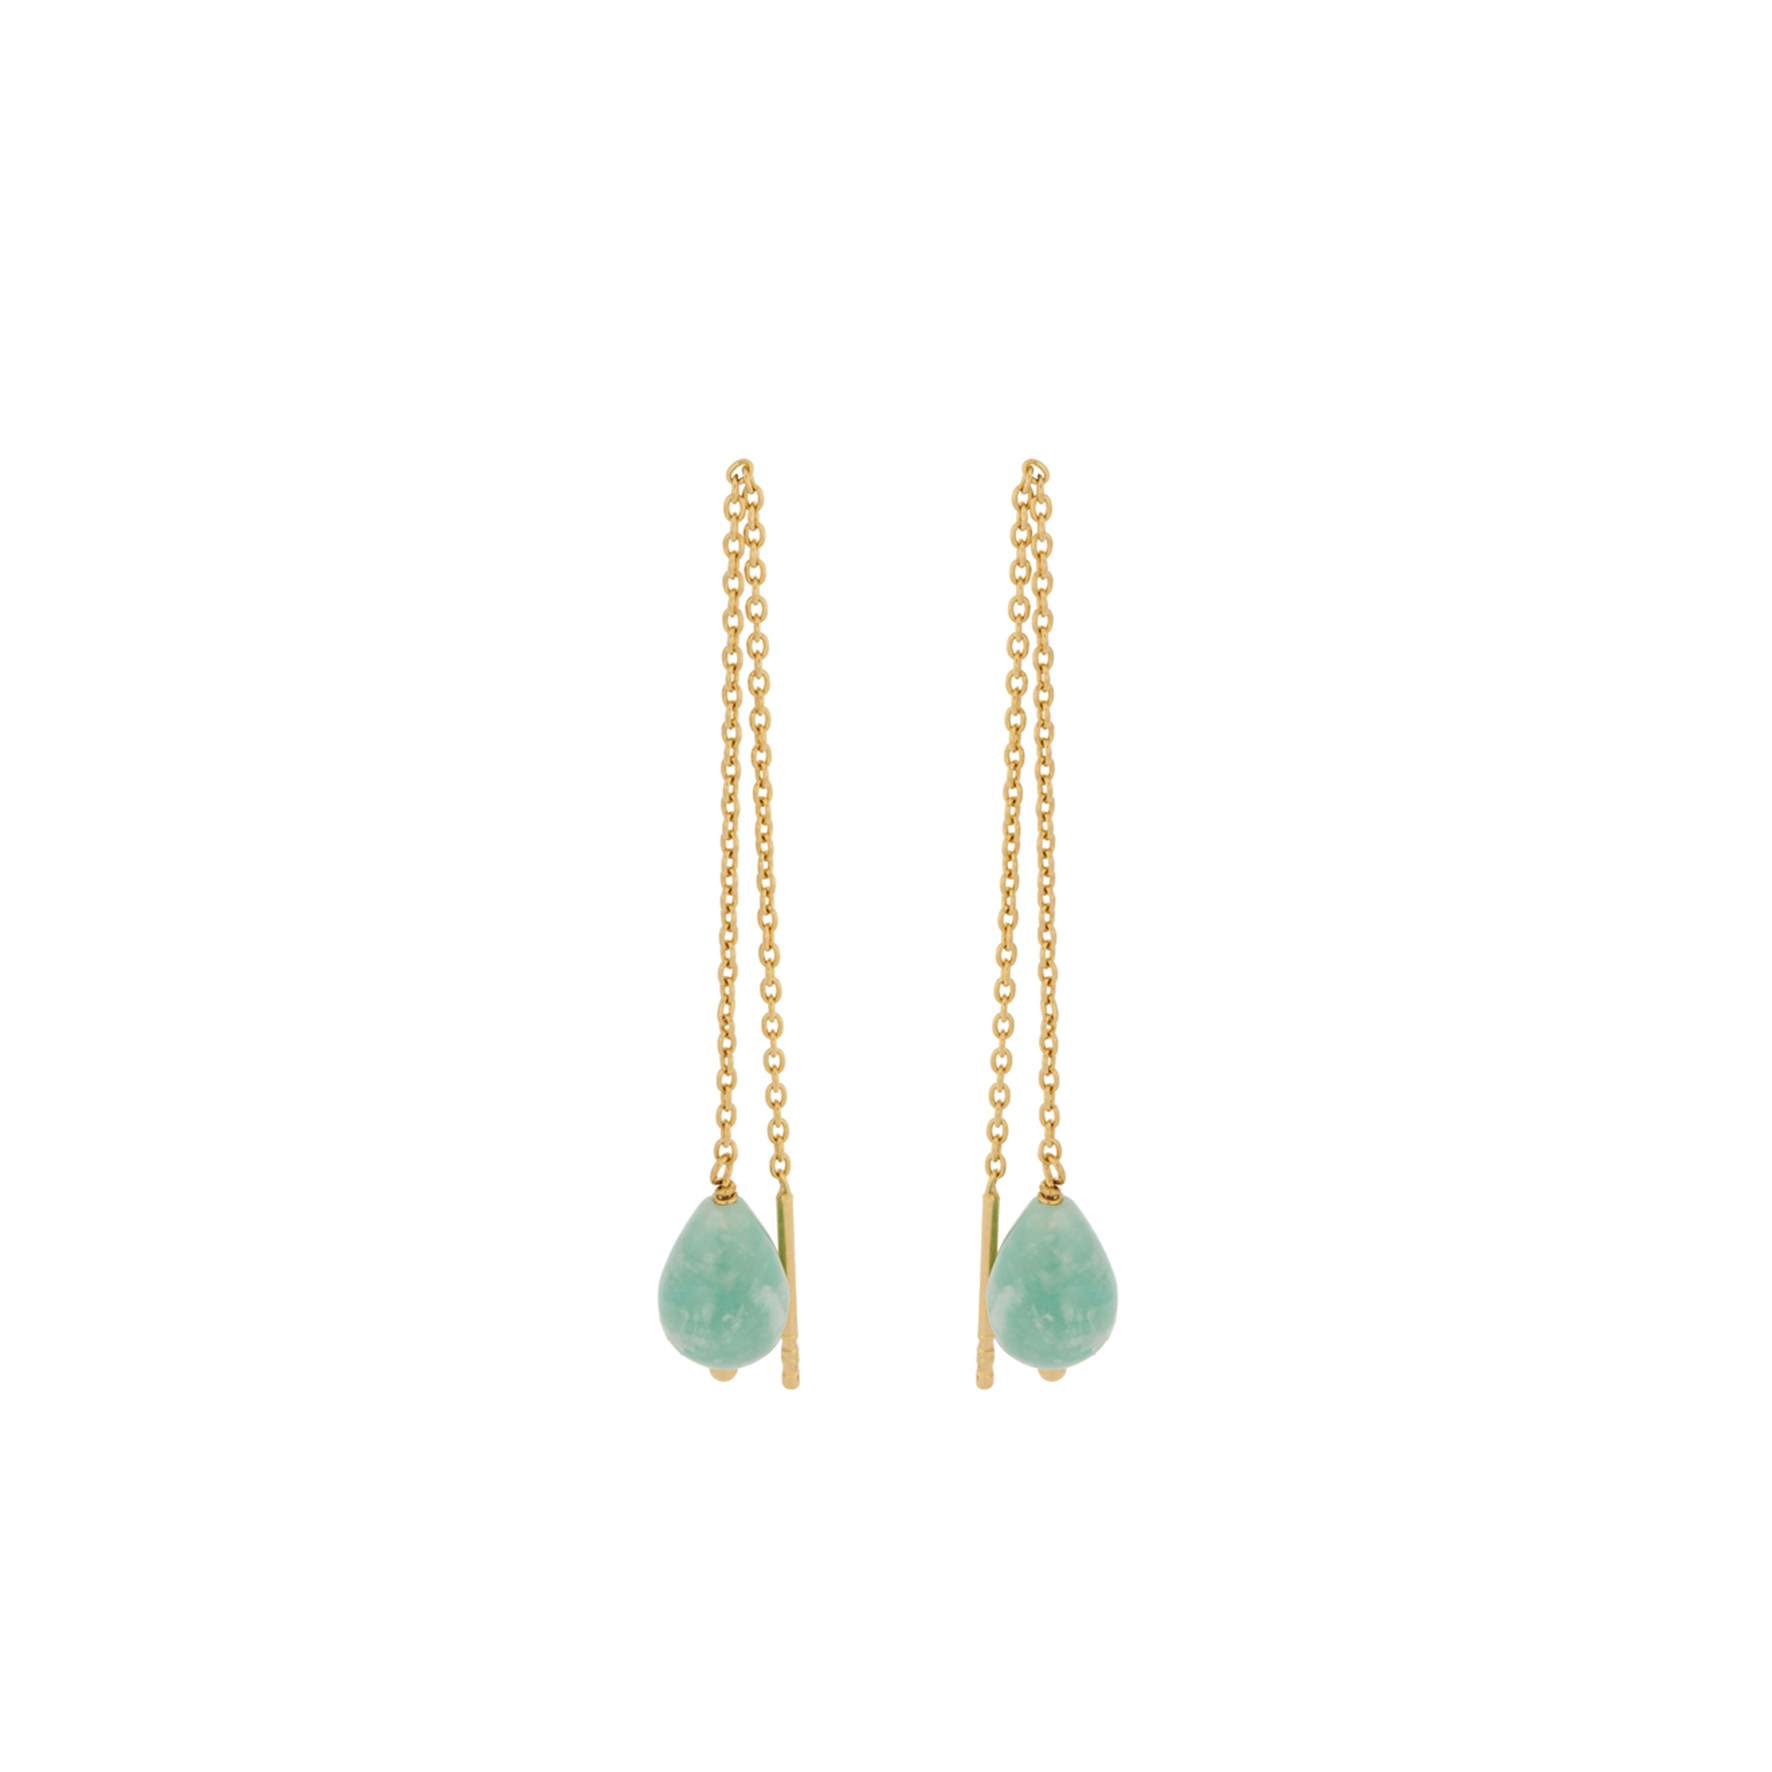 Fjord Earchains from Pernille Corydon in Goldplated-Silver Sterling 925|Amazonite